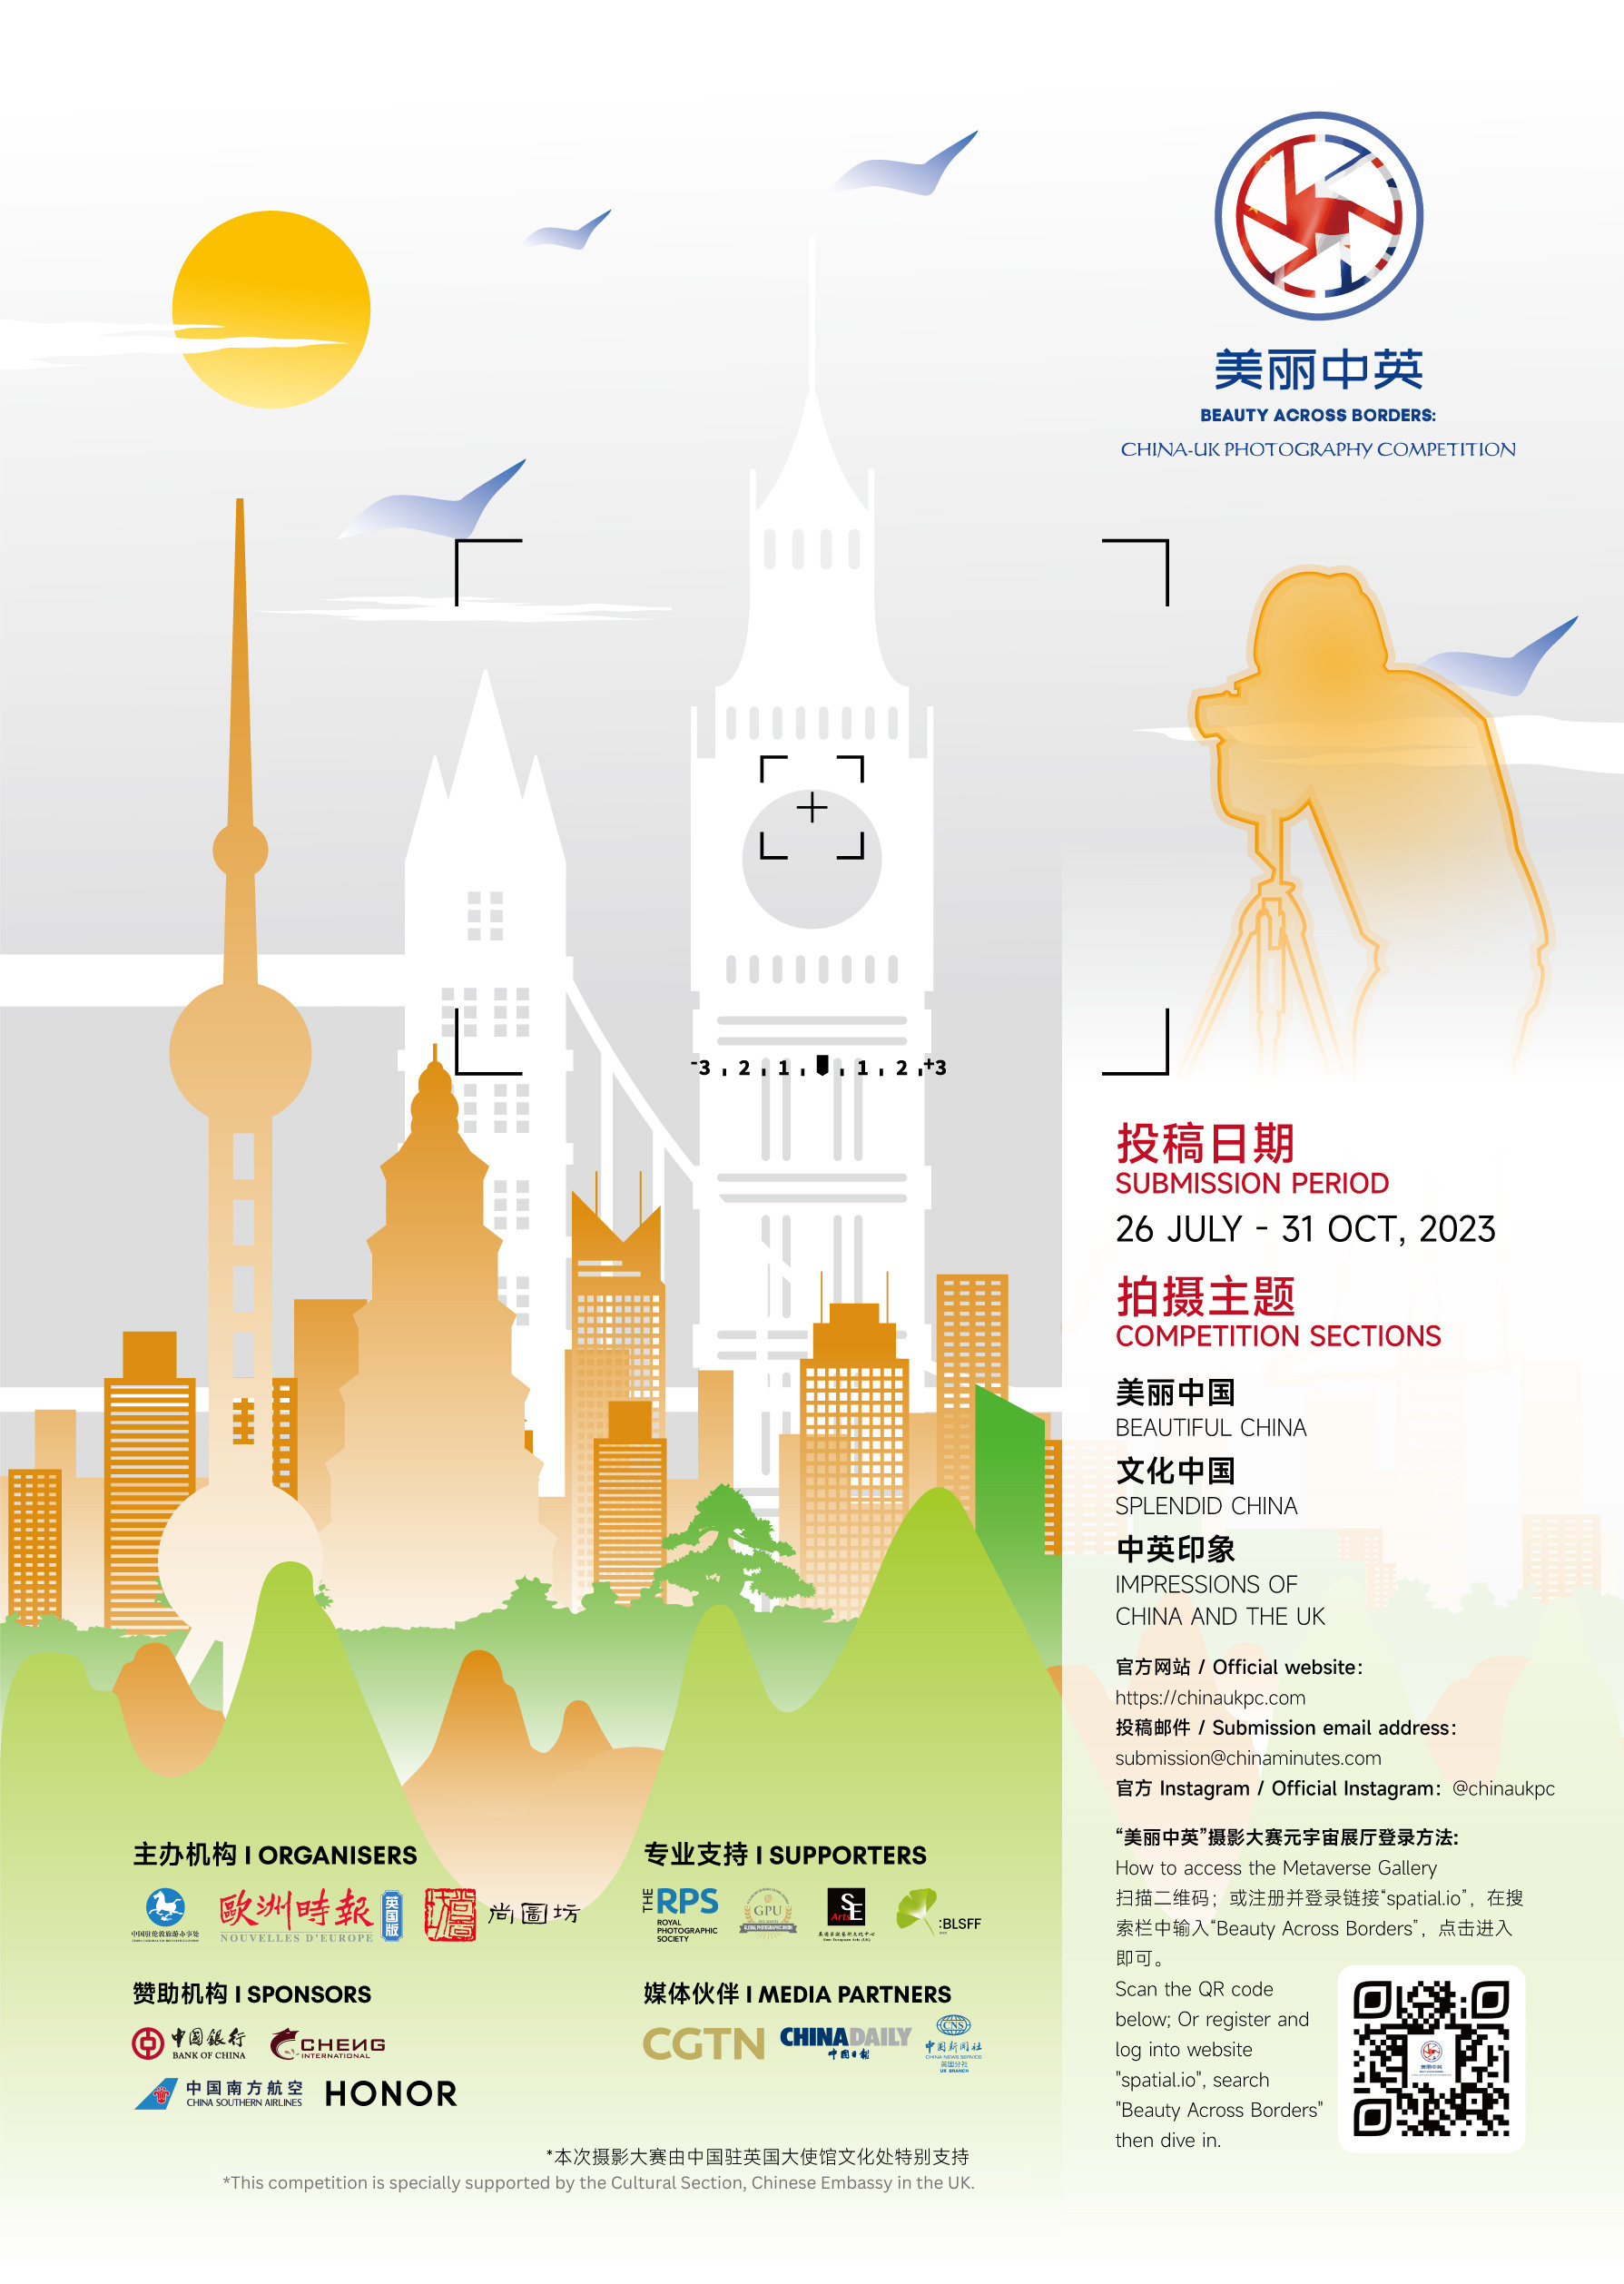 Poster of the 'Beauty Across Borders' China-UK photography competition. /China-UK photography competition handout